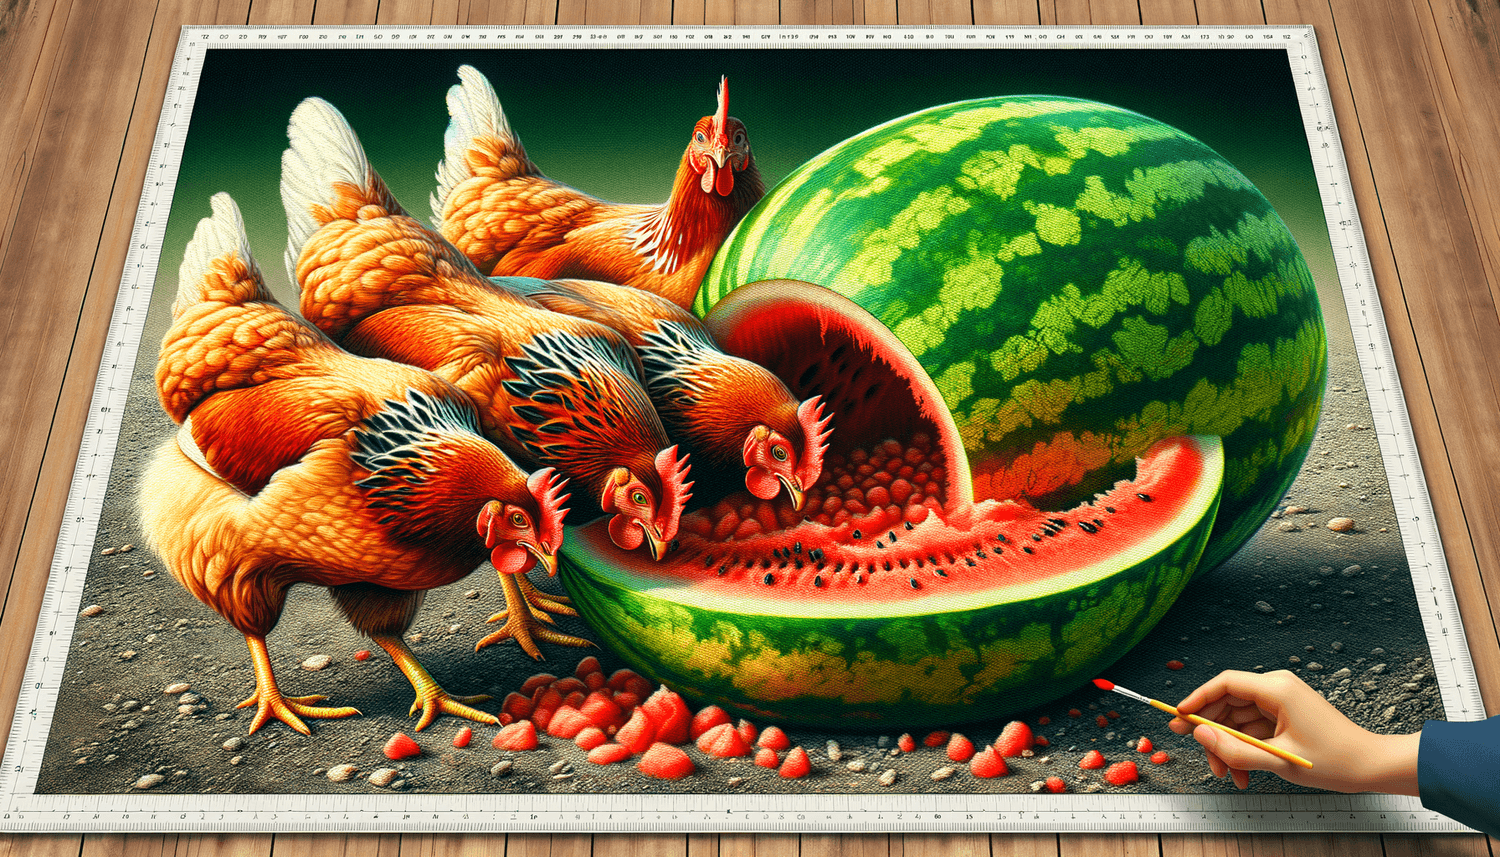 Can Chickens Eat Watermelon Peel?